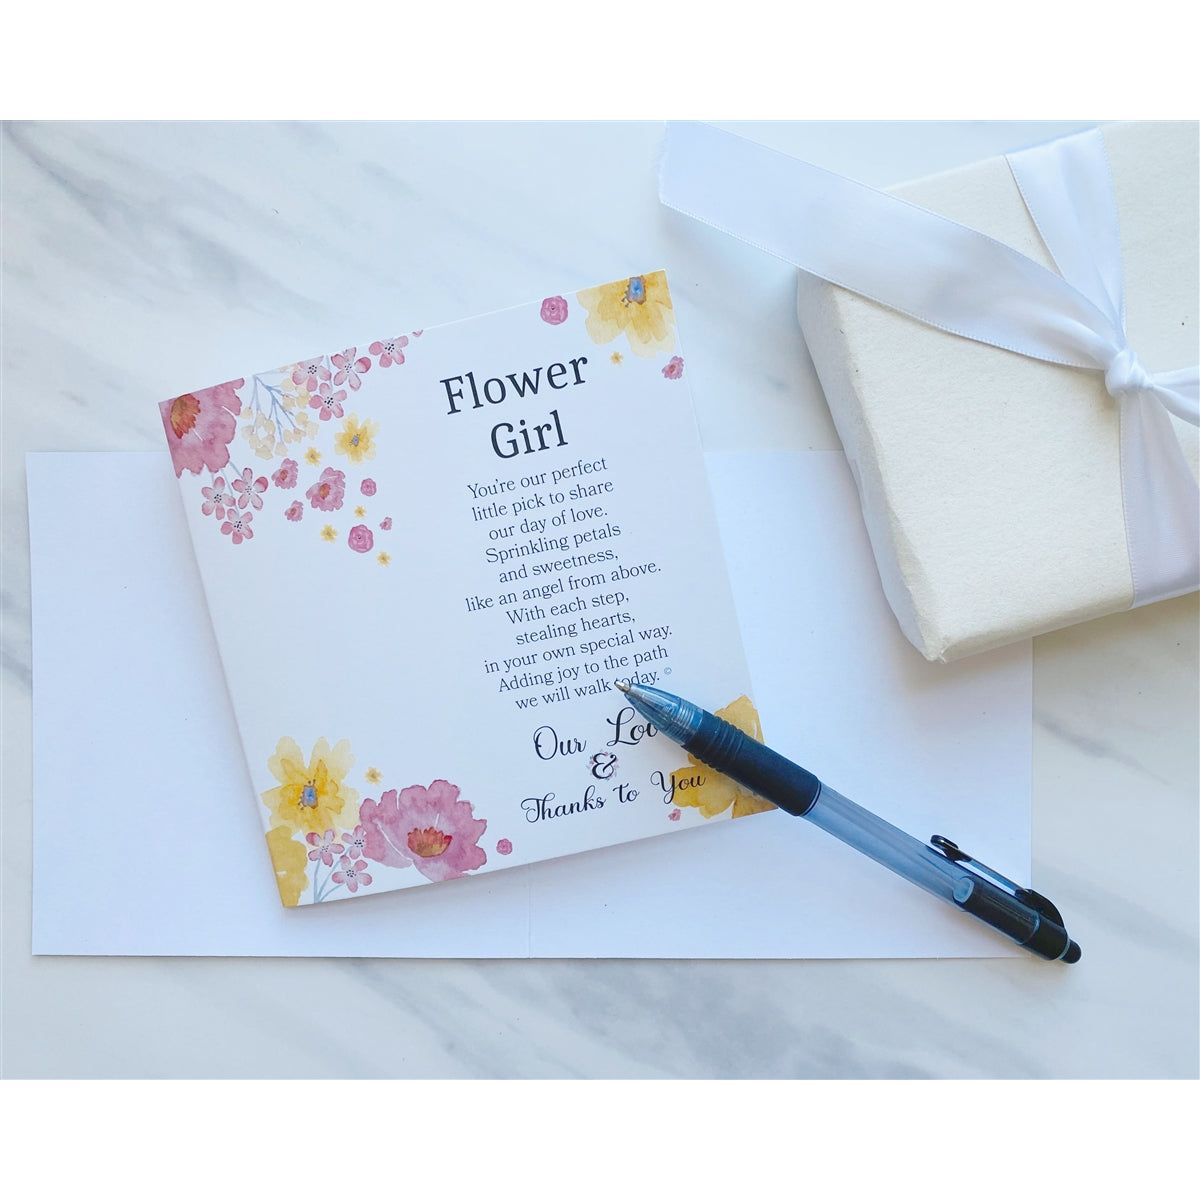 High quality folded card for the giver to write a special note to the flower girl.